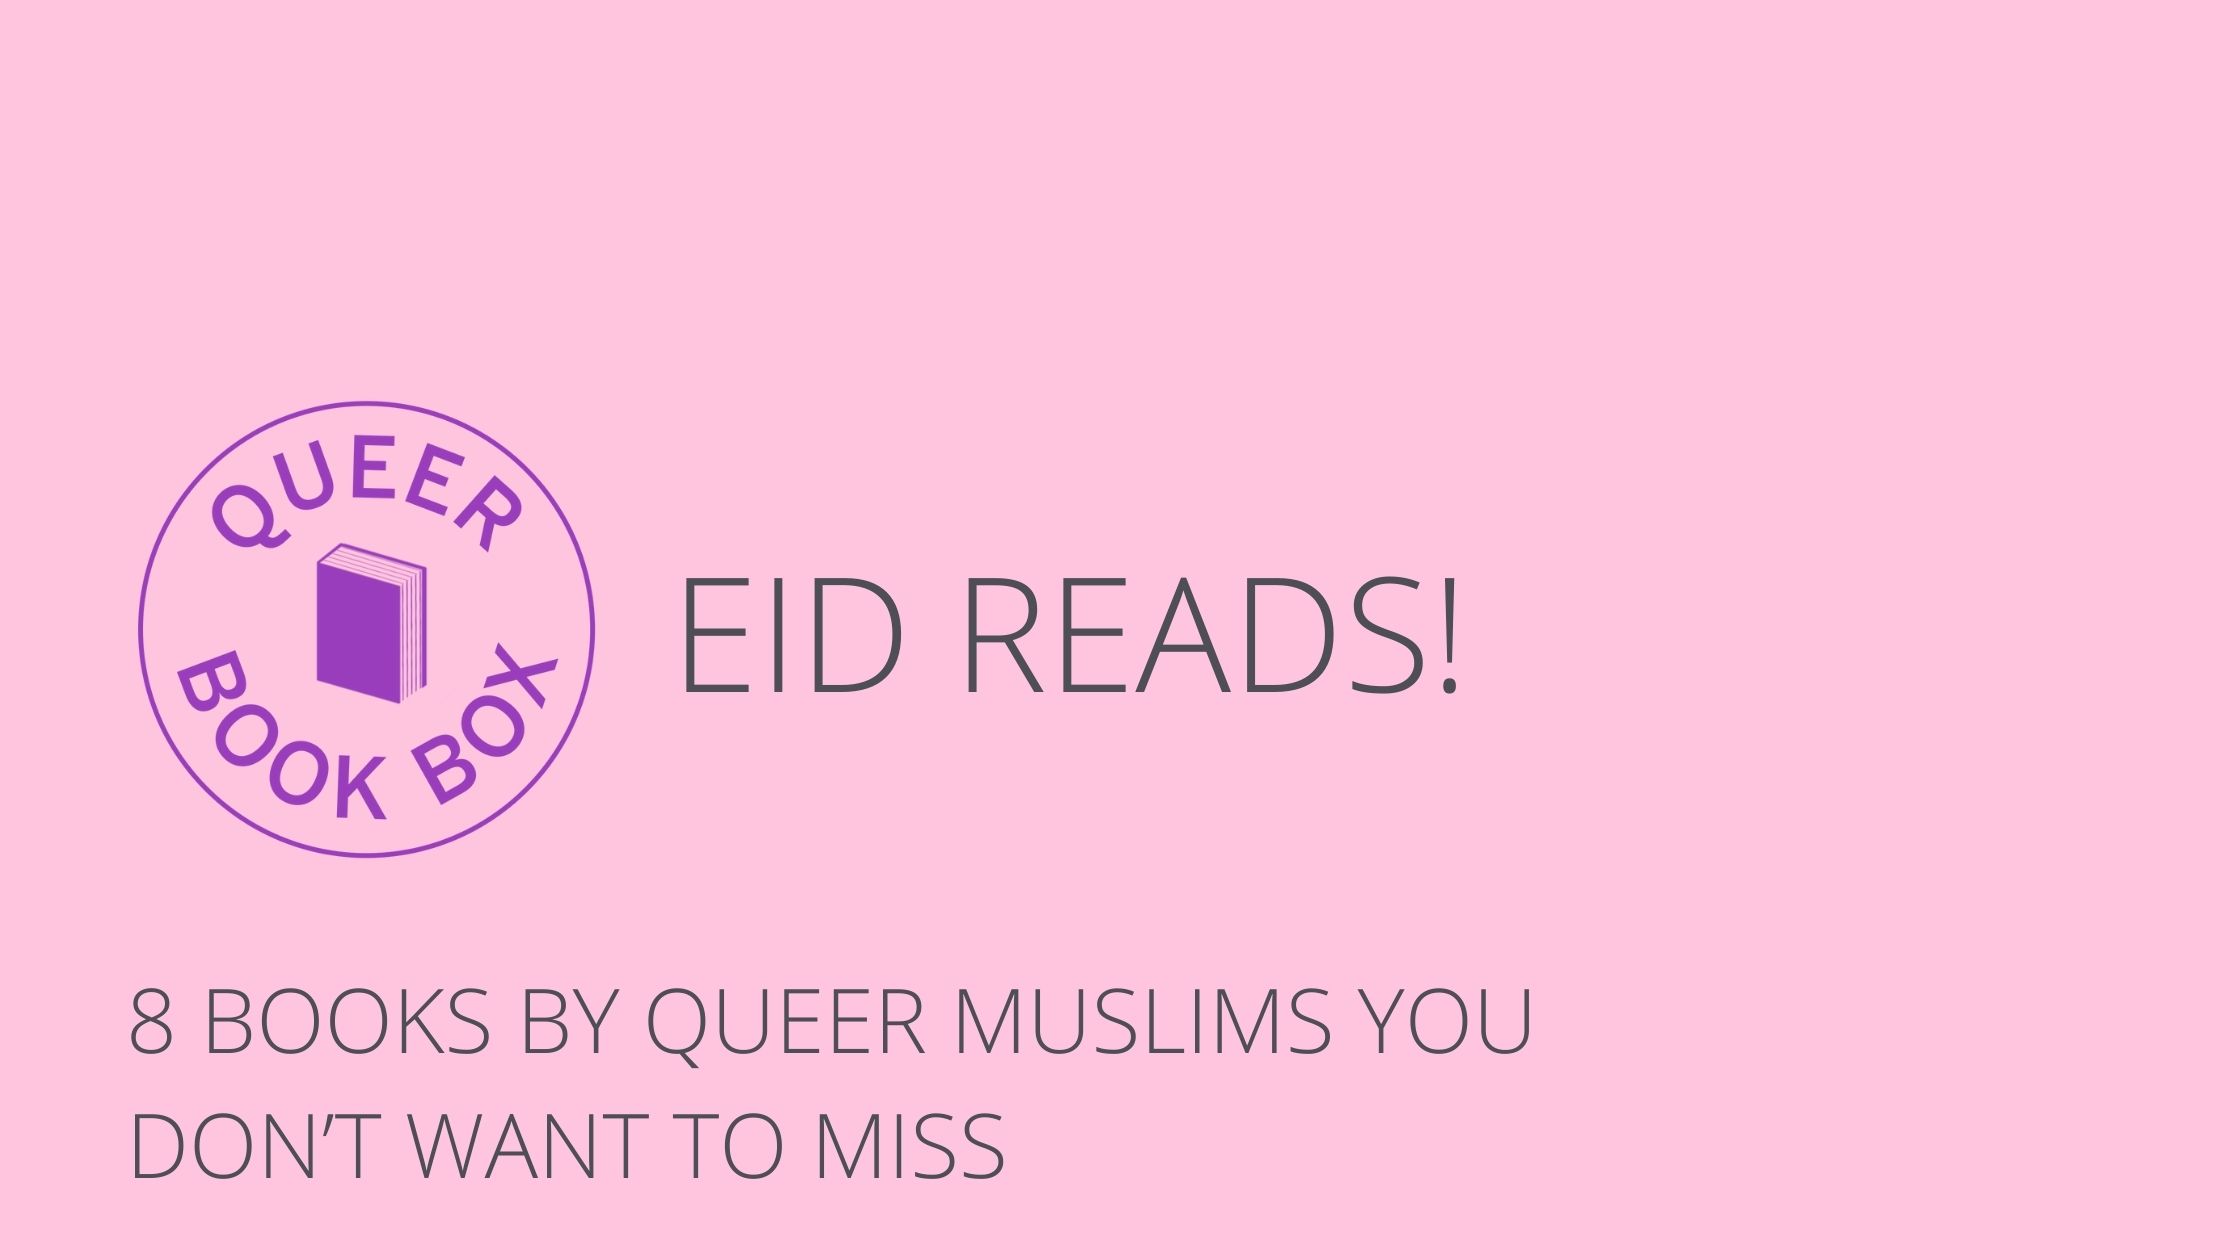 Eid Reads! 8 books by queer Muslims you don’t want to miss